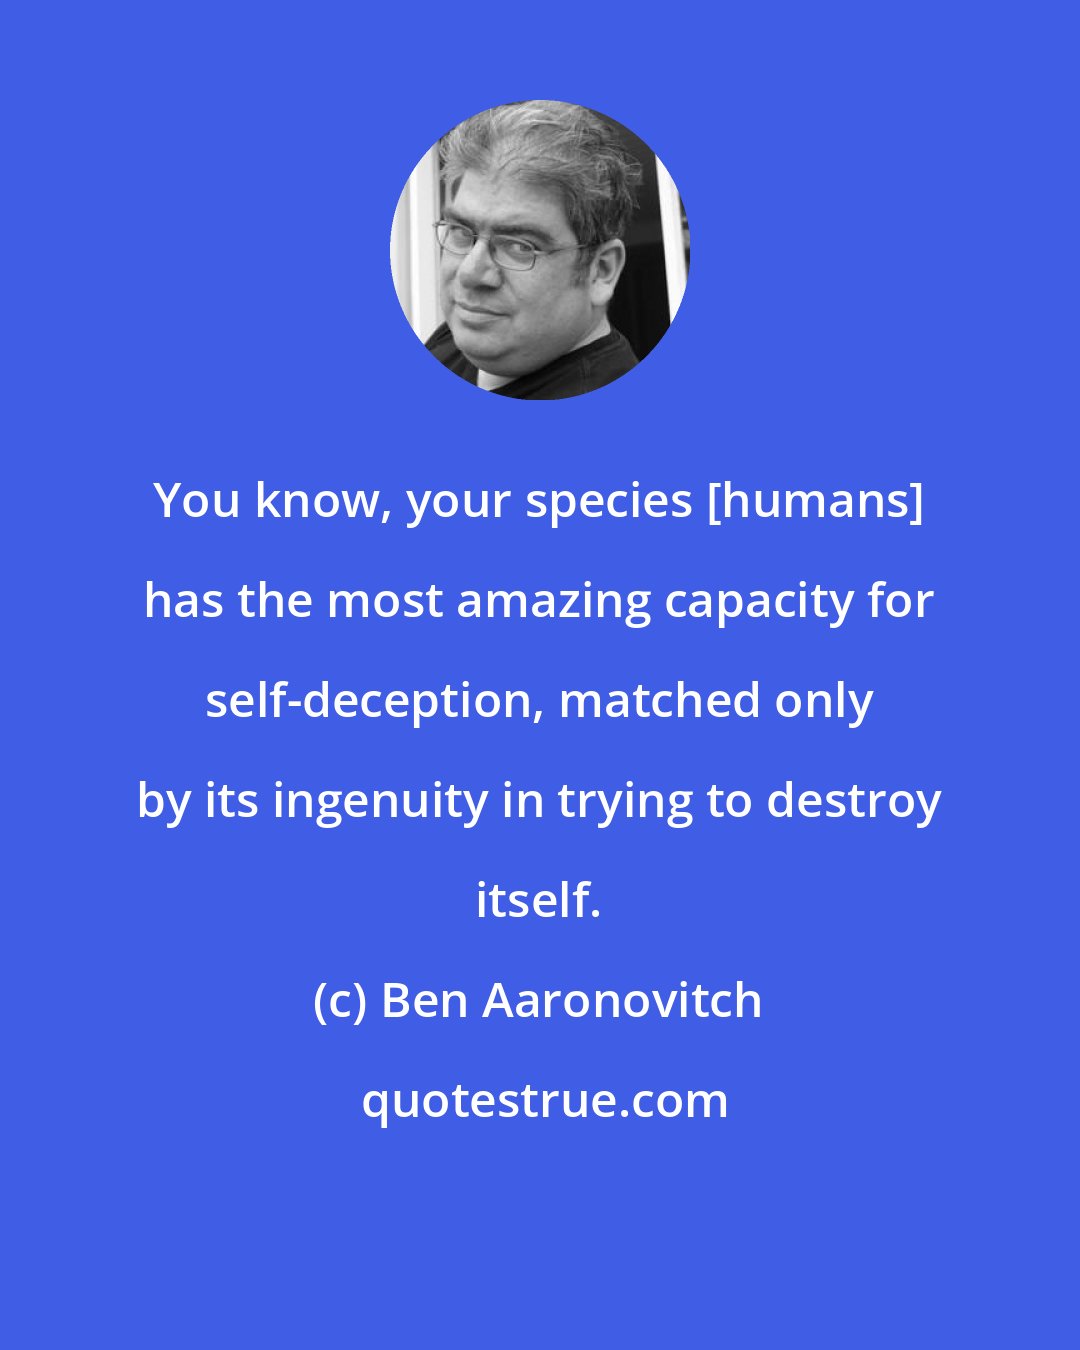 Ben Aaronovitch: You know, your species [humans] has the most amazing capacity for self-deception, matched only by its ingenuity in trying to destroy itself.